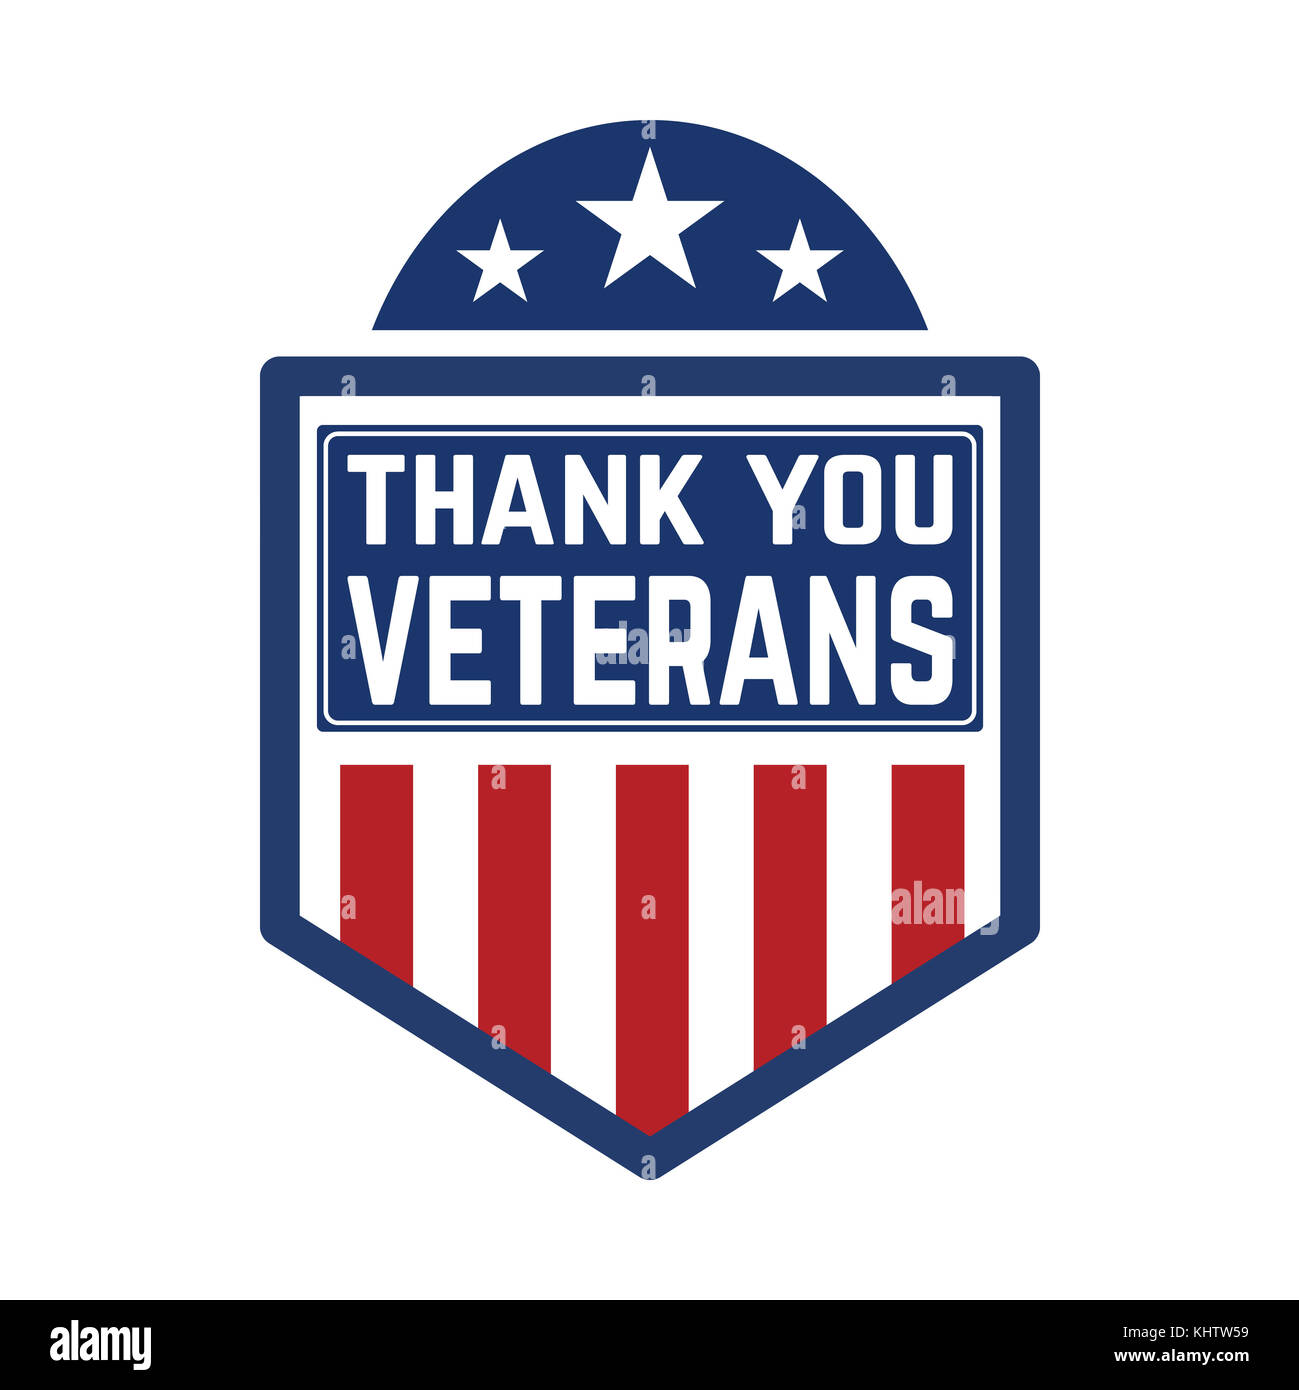 Happy veterans day emblem template isolated on white background. Design element for label, emblem, sign, poster. Vector illustration Stock Photo